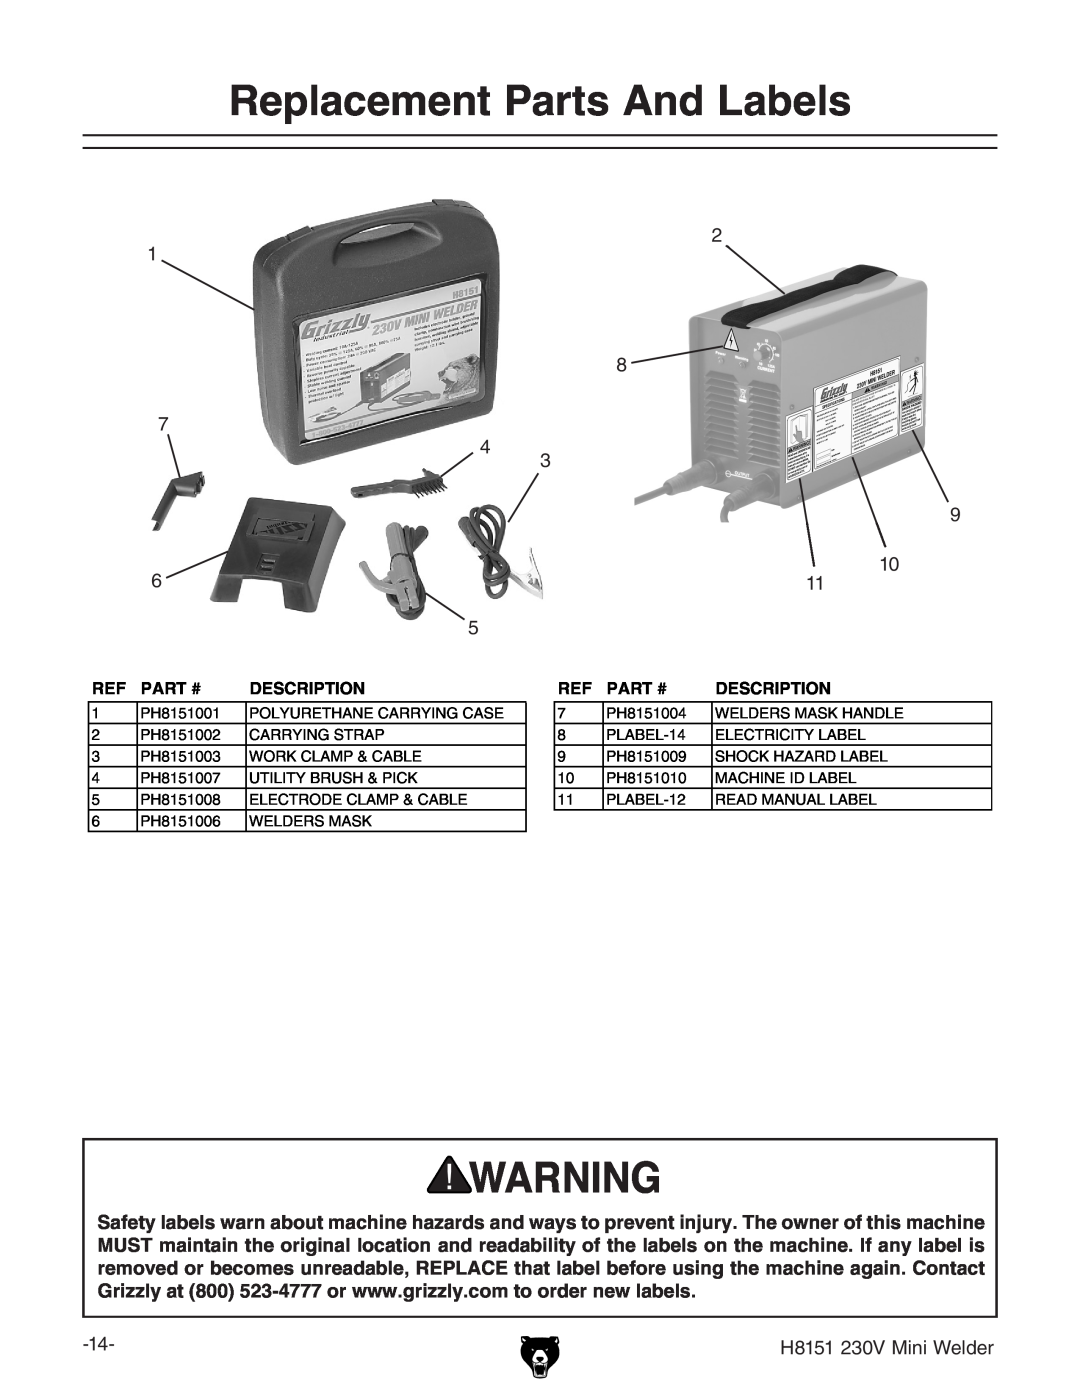 Grizzly H8151, 230V owner manual Replacement Parts And Labels, Part #, Description 